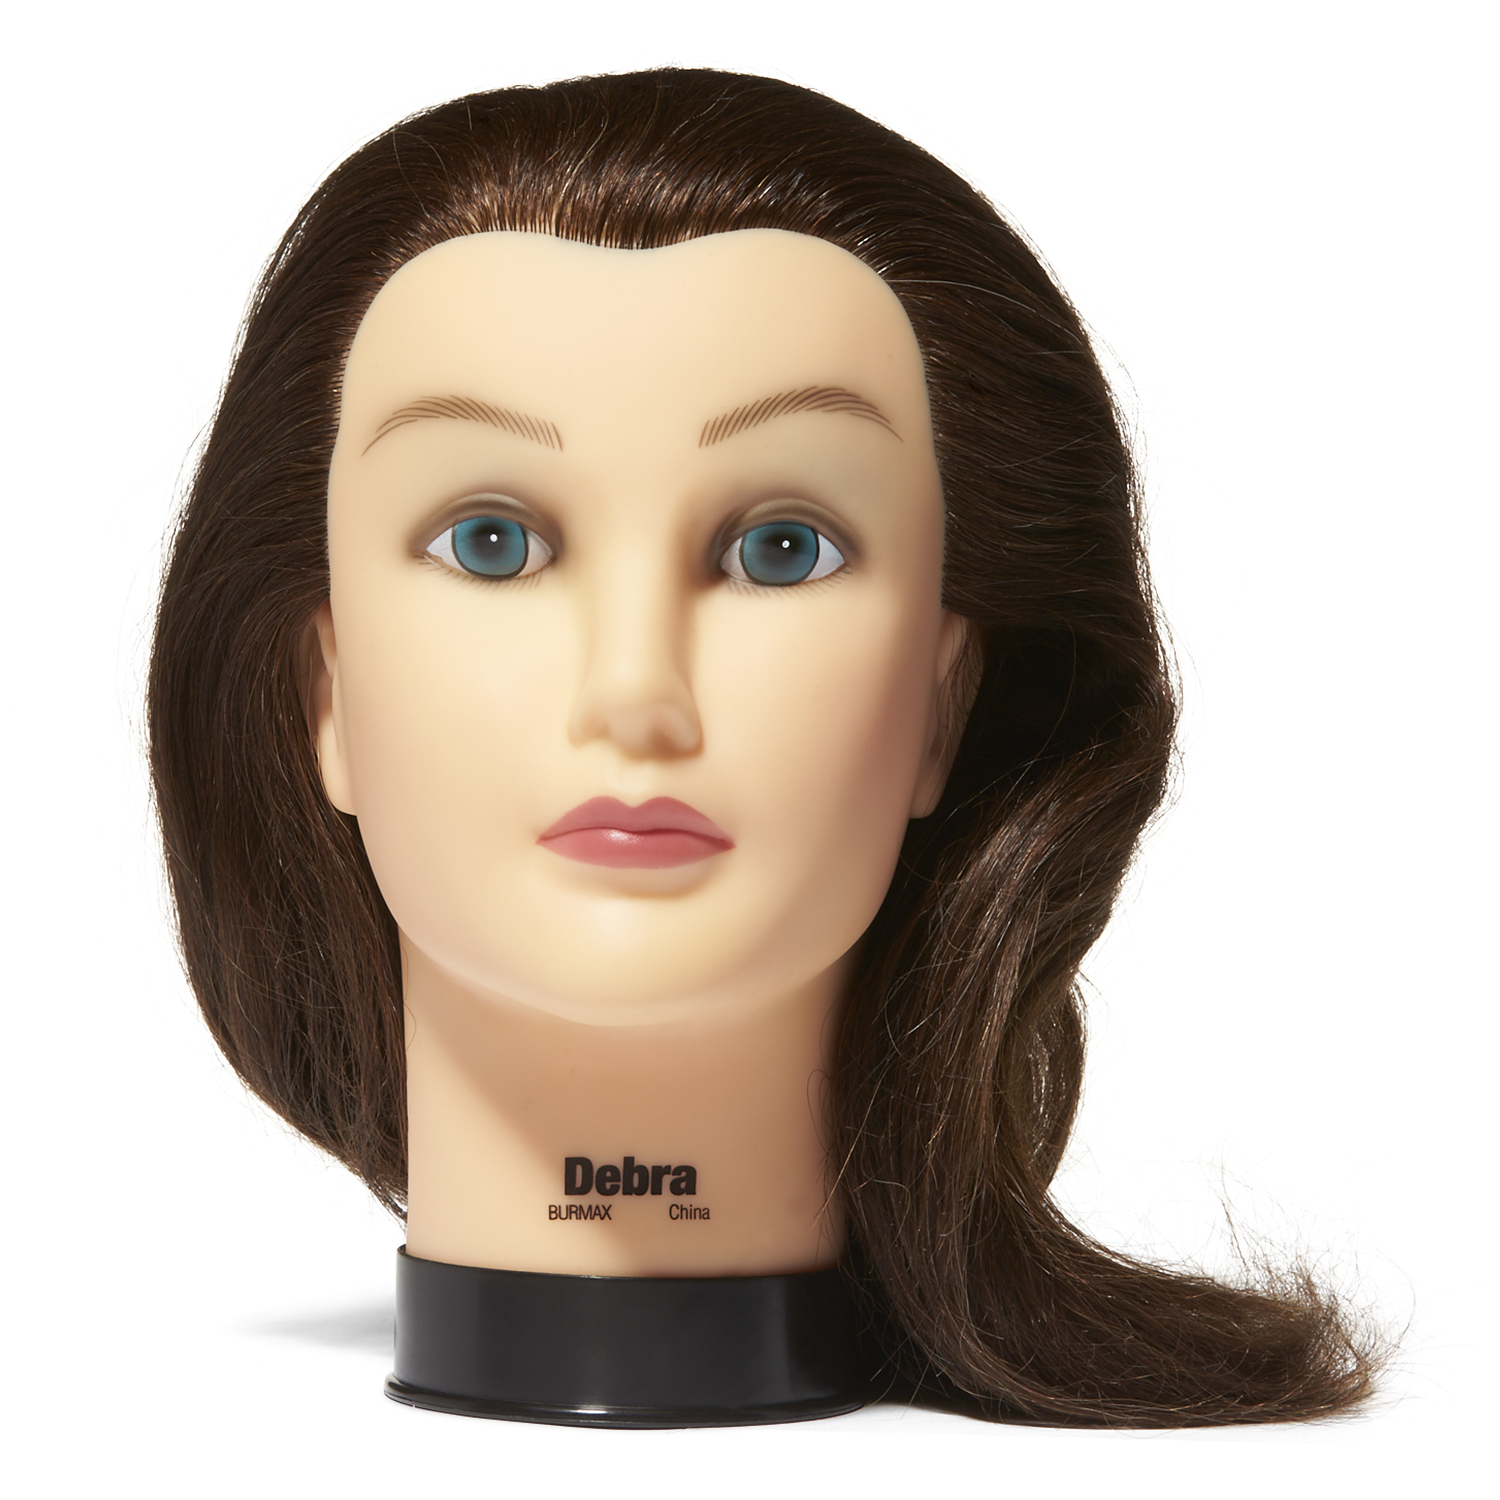 hair styling mannequin heads canada